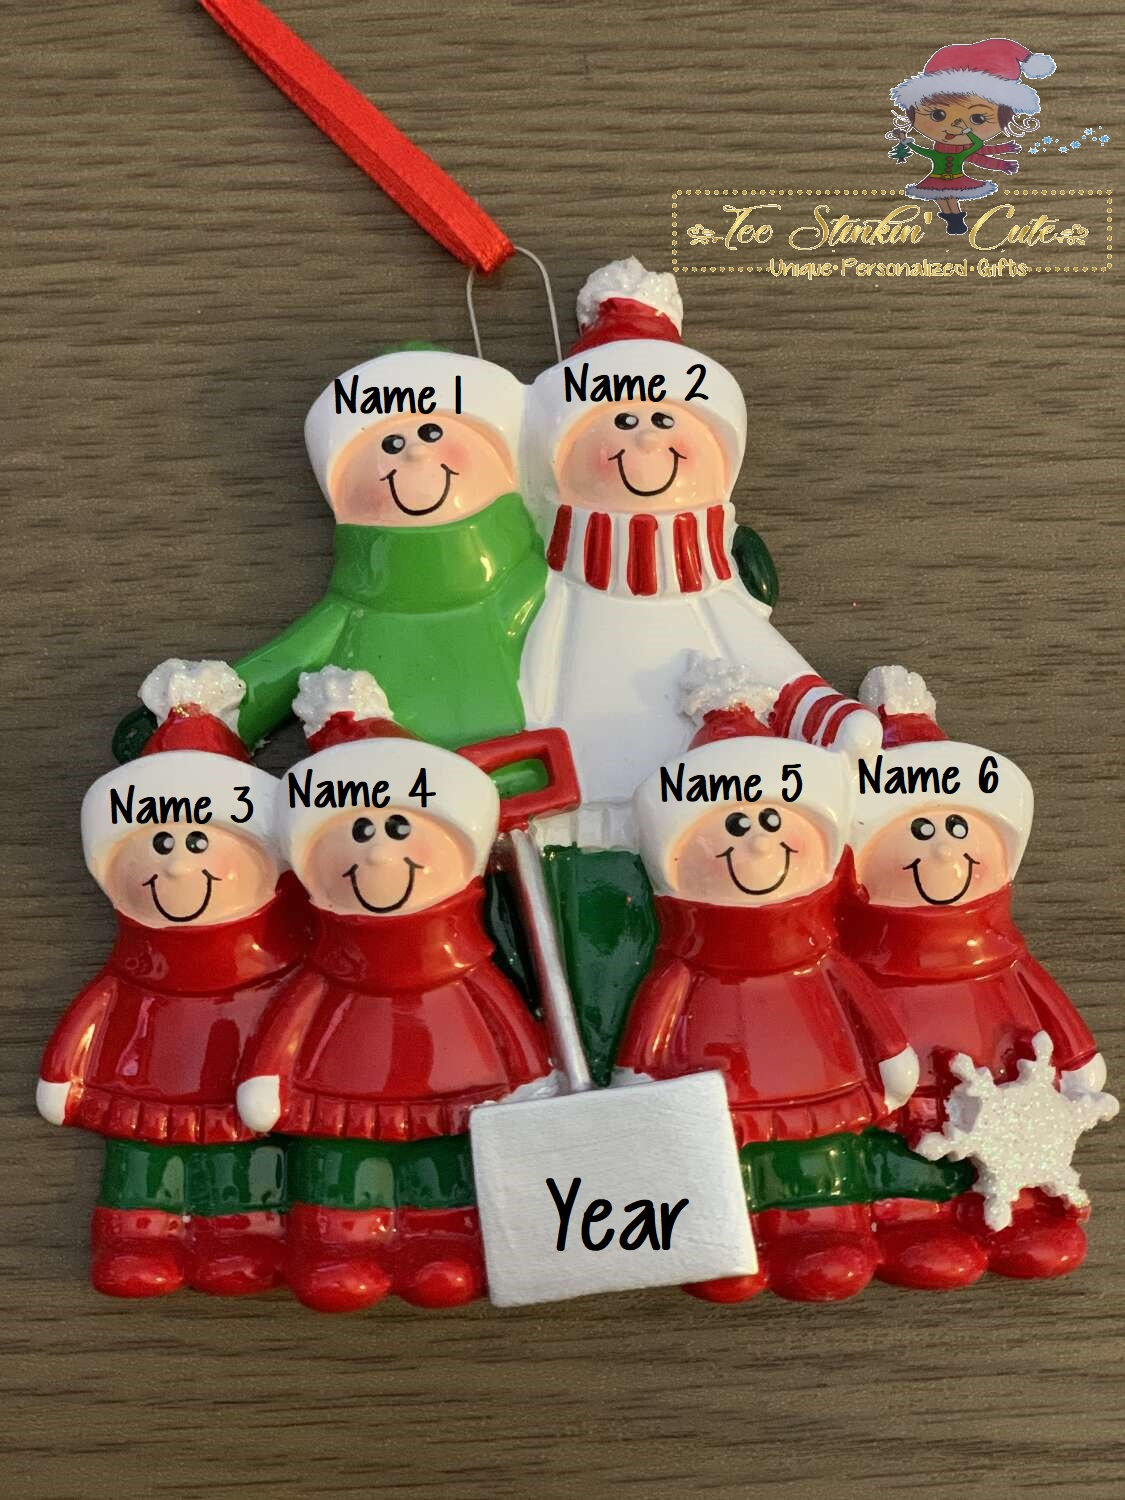 Personalized Christmas Ornament Shovel Family of 6 + Free Shipping!